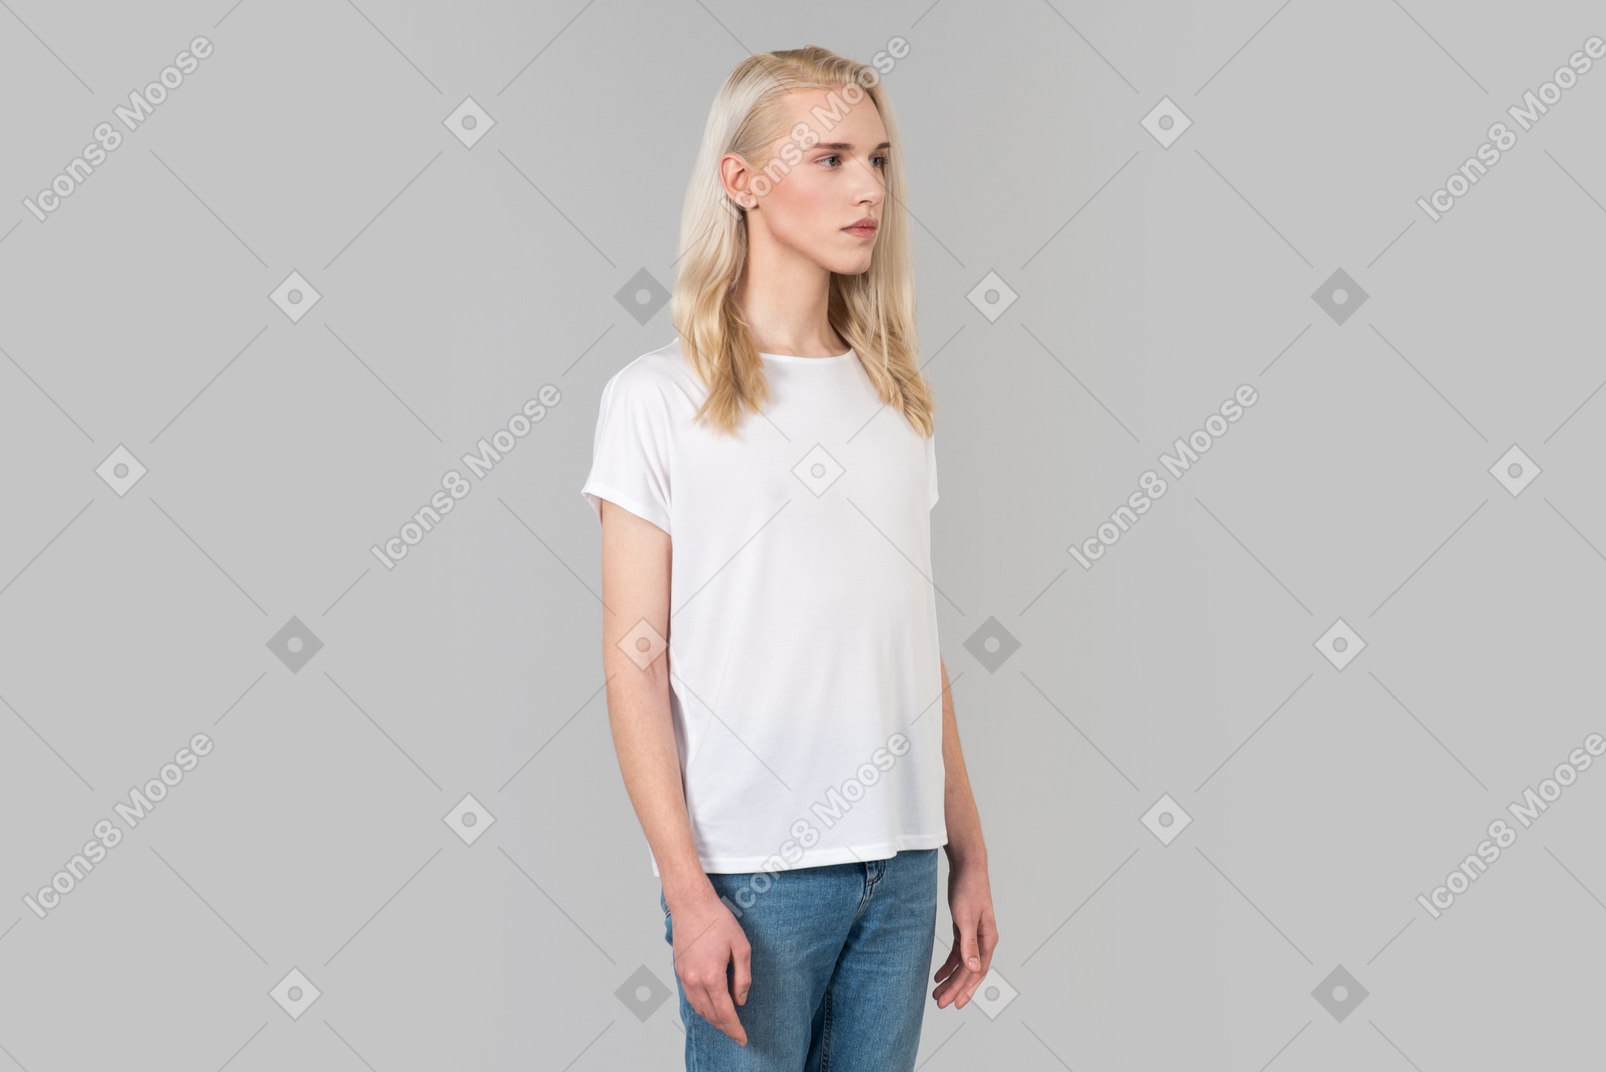 Beautiful young man with long blonde hair